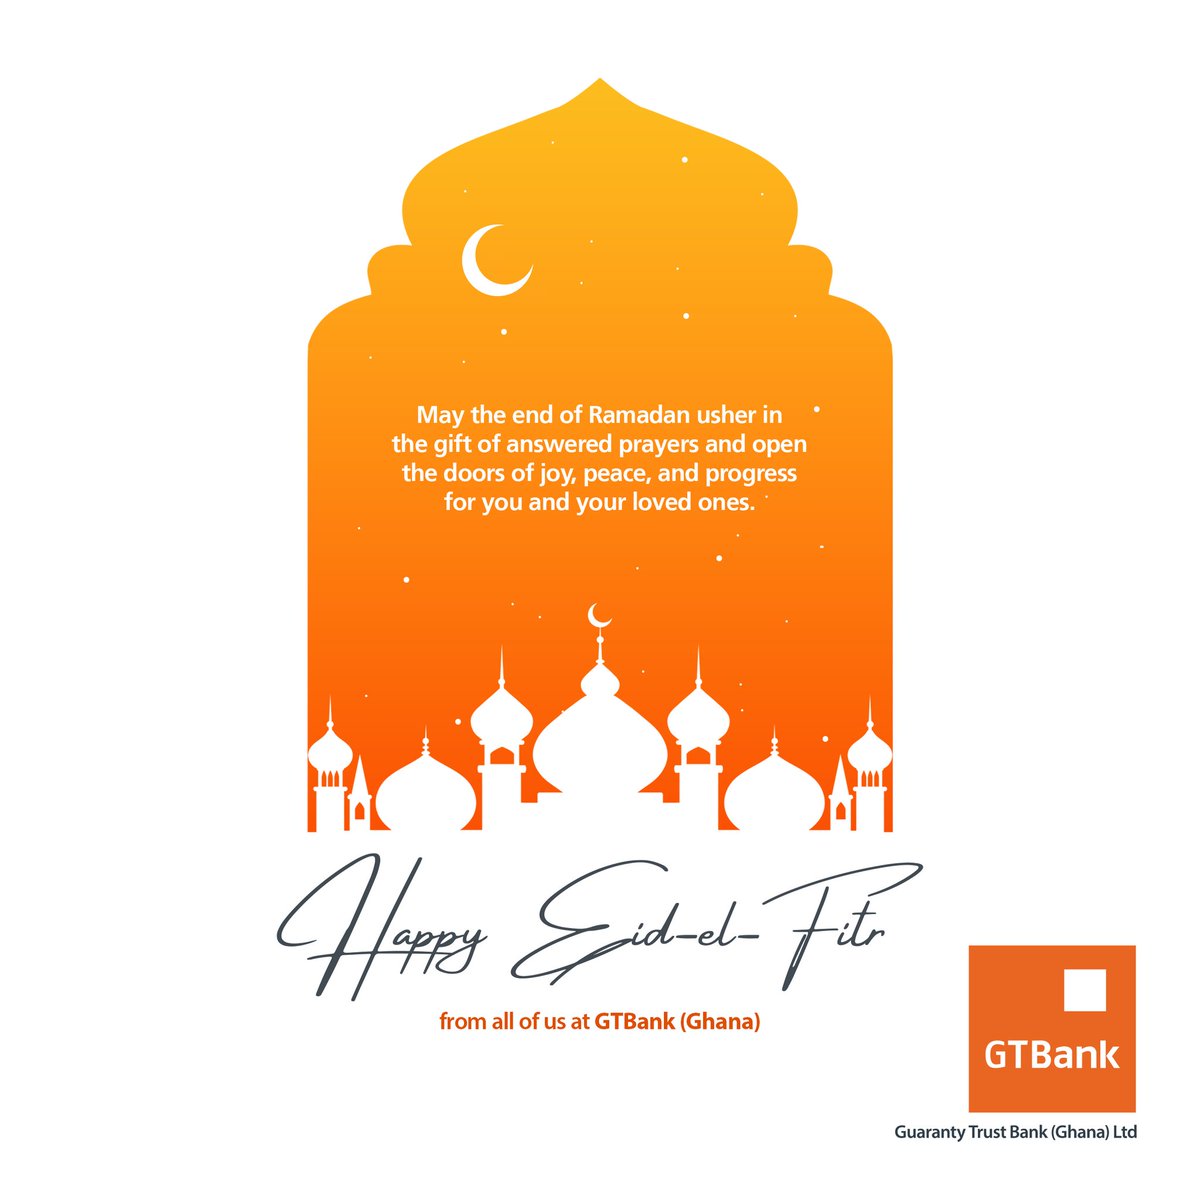 May the end of Ramadan usher in the gift of answered prayers and open the doors of joy, peace, and progress for you and your loved ones.
Happy Eid-el-Fitr!
#Ramadan
#EidMubarak 
#GTBankgh